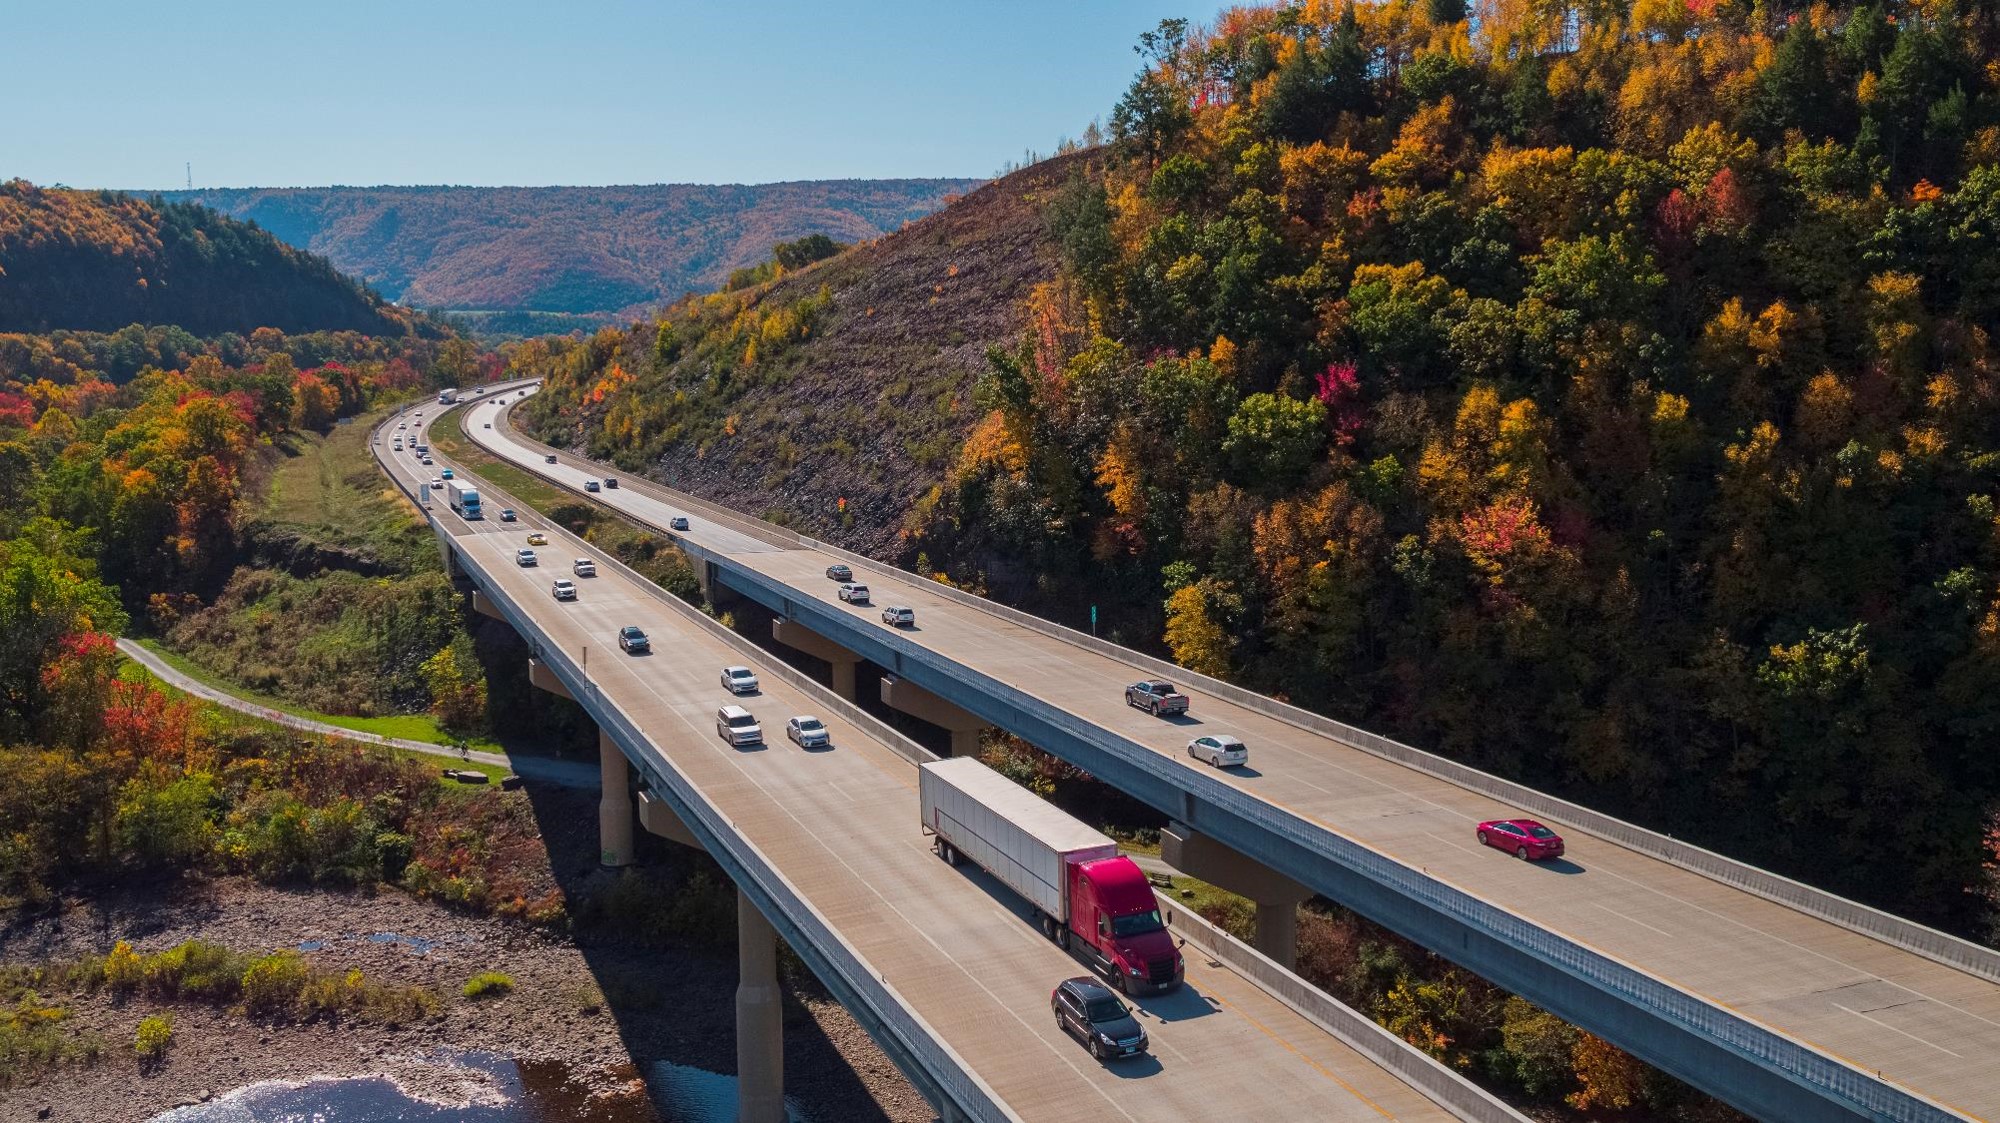 Two highway bridges with cars driving both ways set between rolling hills filled with fall colors